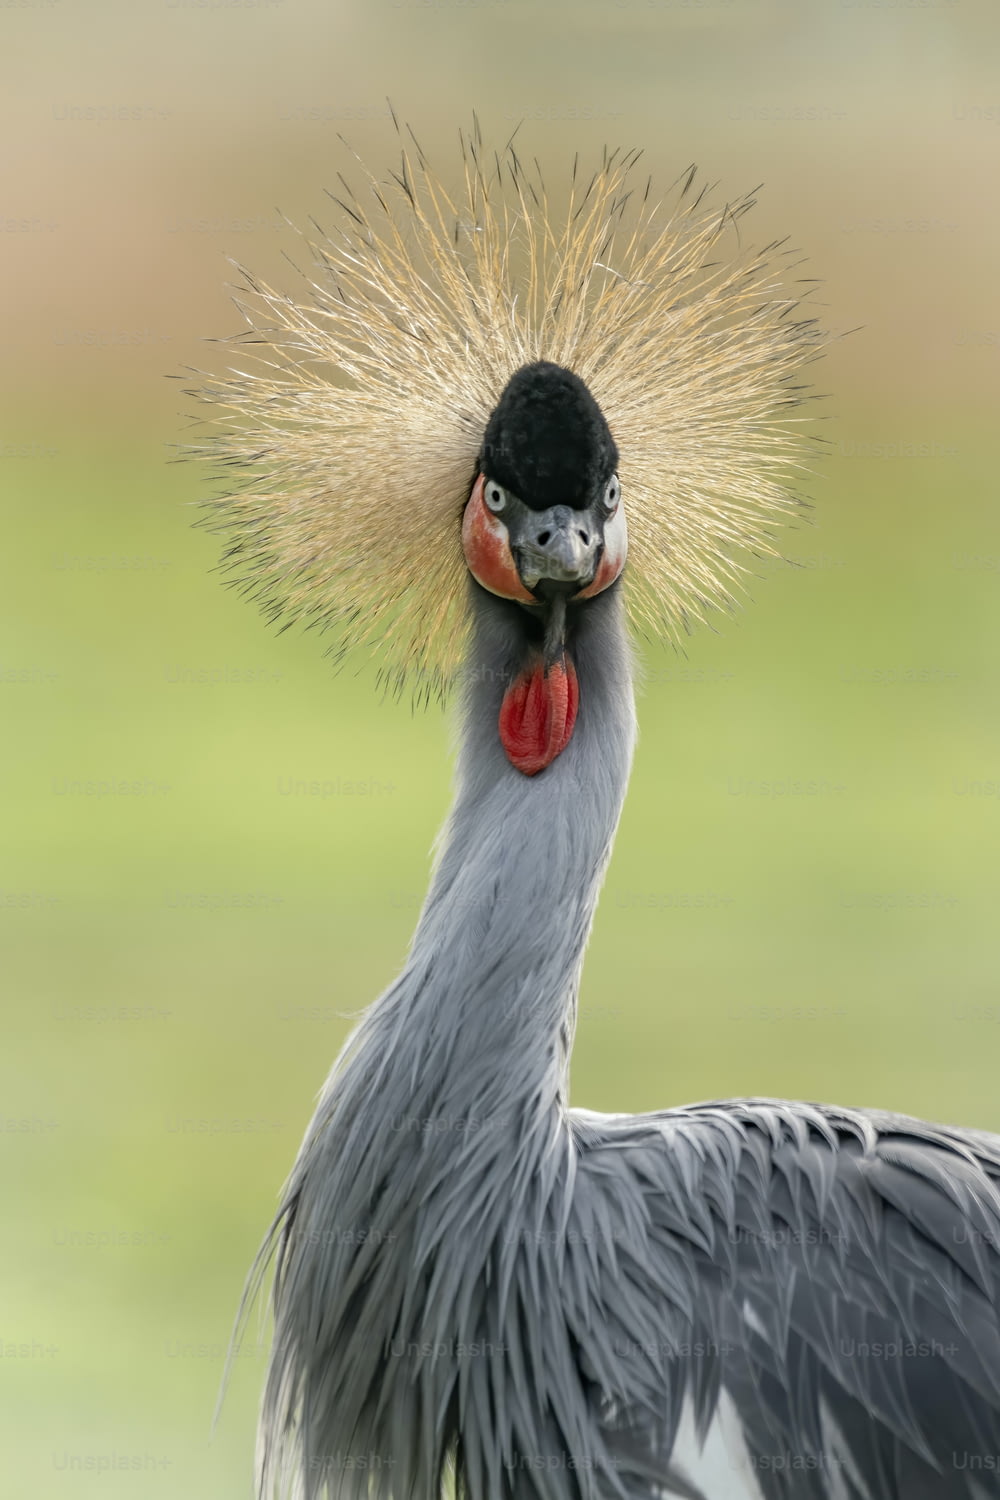 Portrait of a beautiful Black crowned crane, or Black Crested Crane (Balearica pavonina) close-up profile. National bird of Nigeria. Green background.